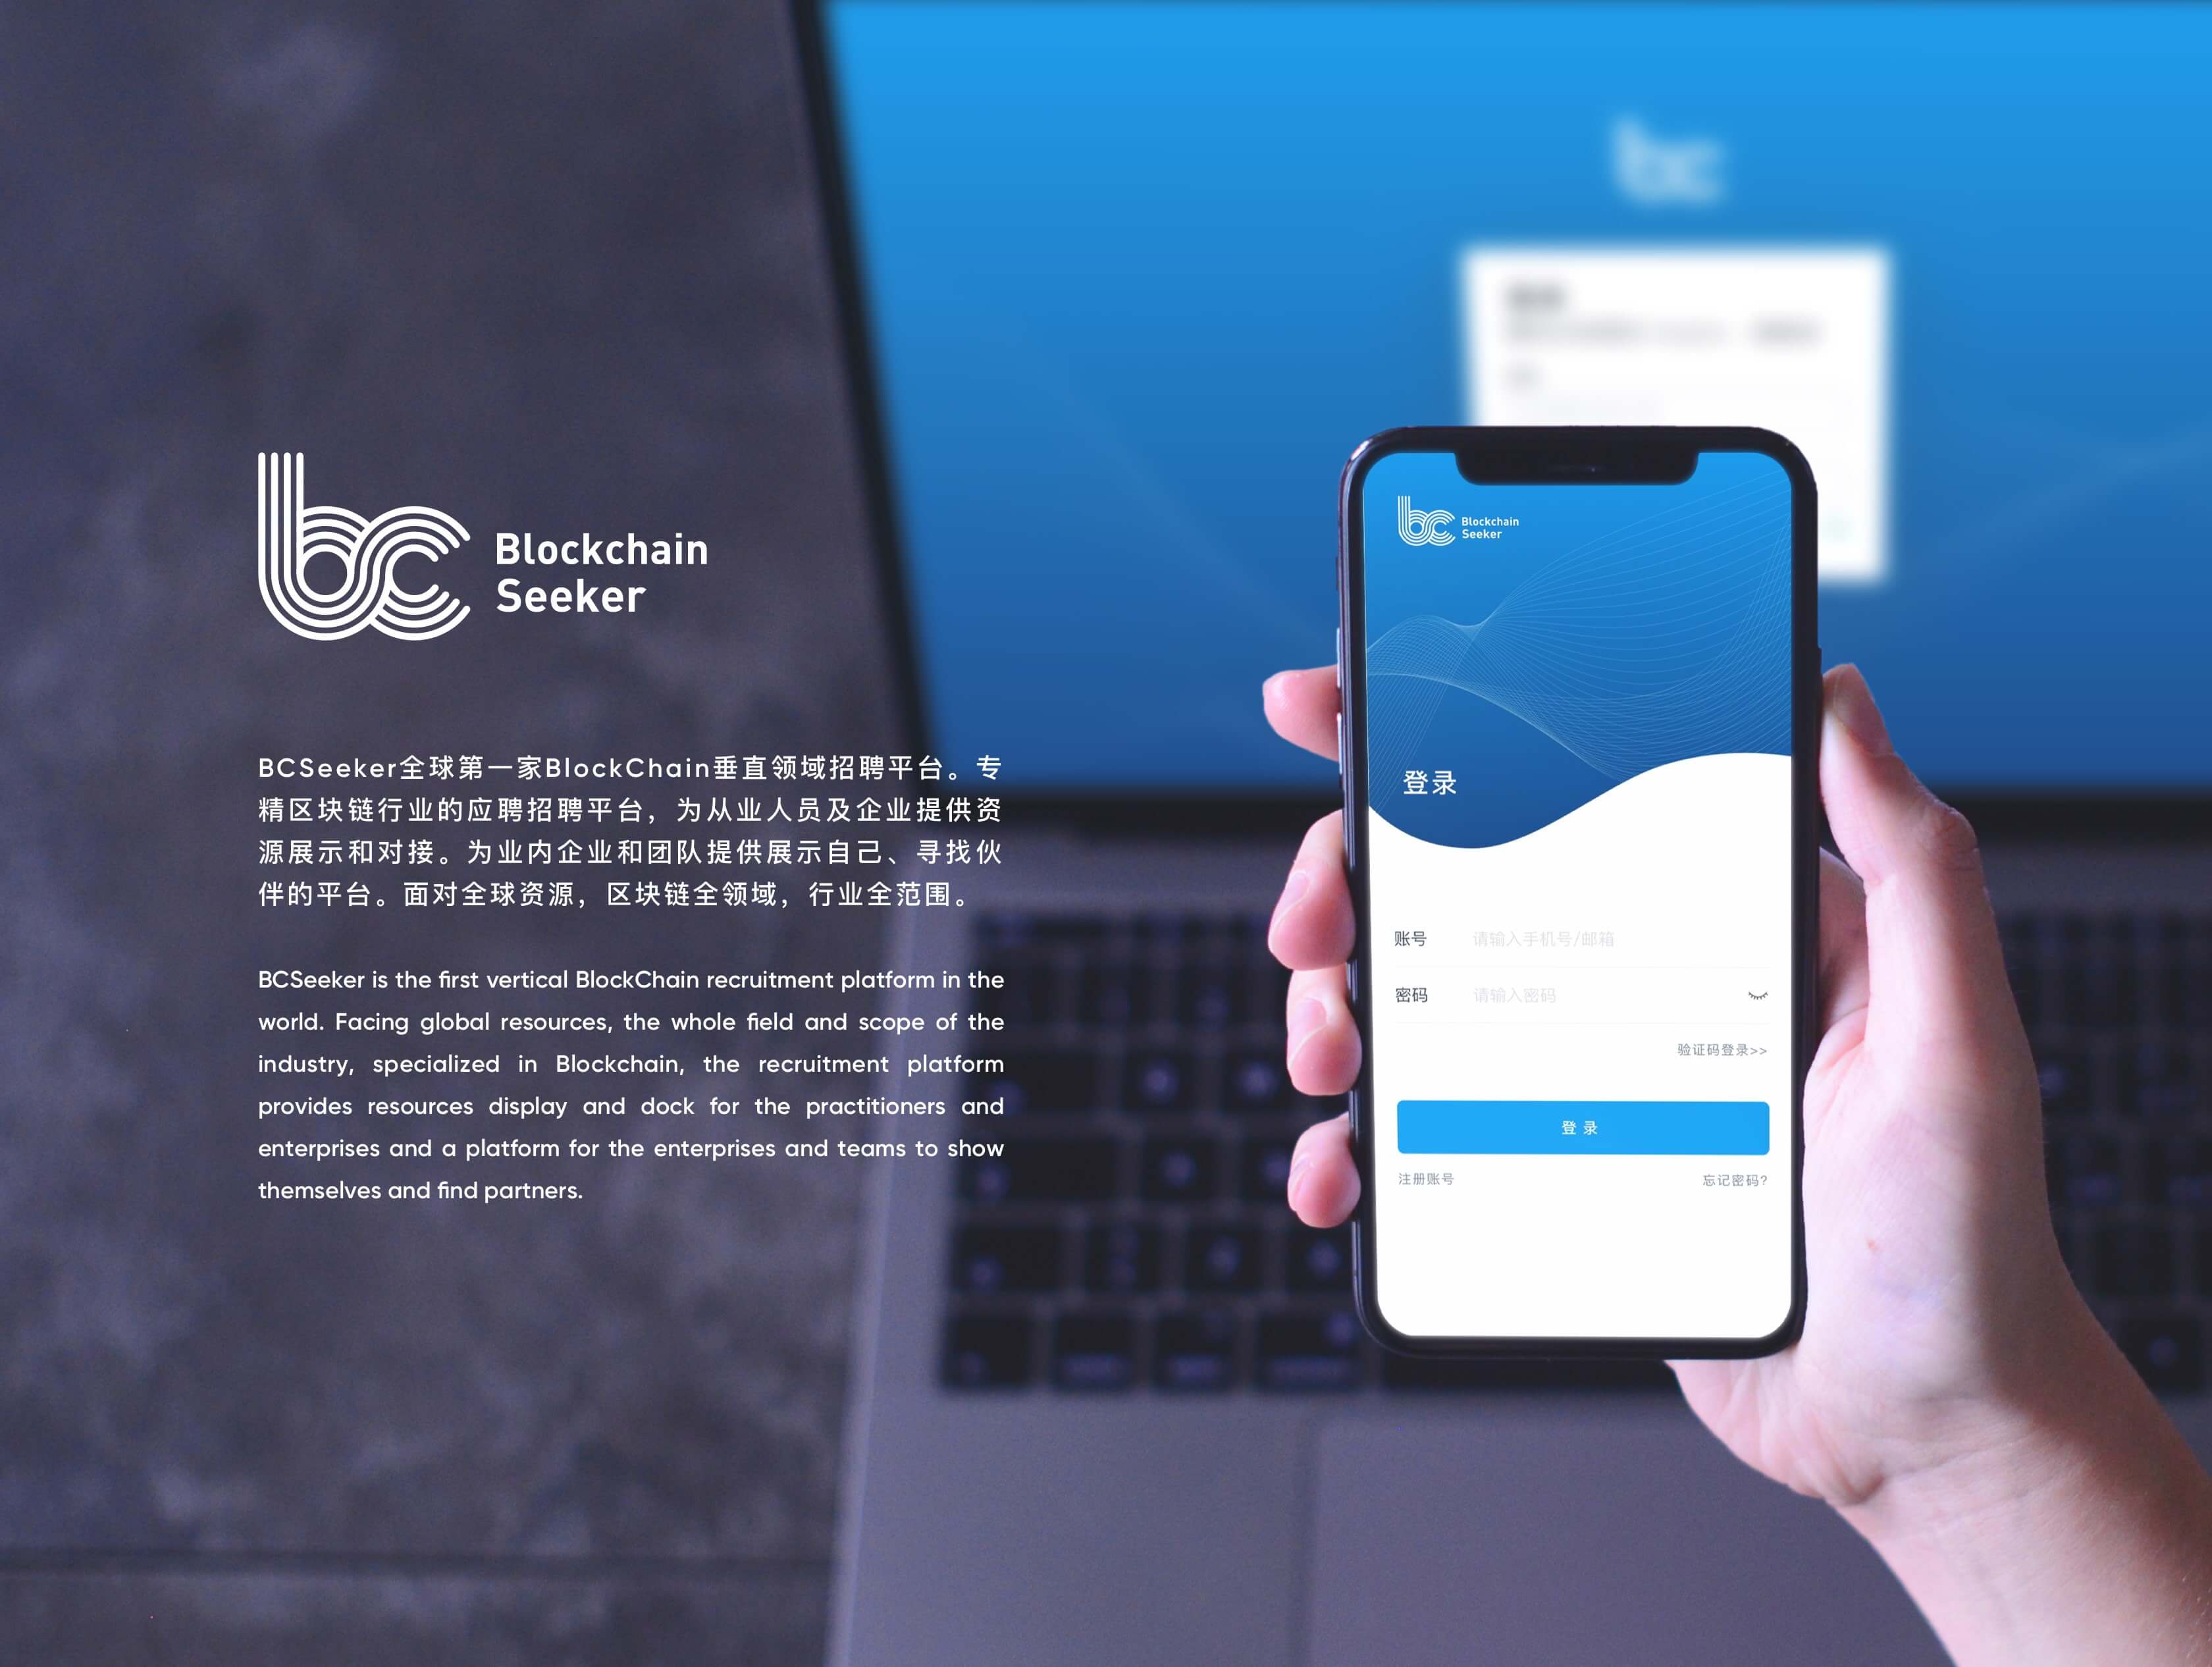 BCSeeker全球第一家BlockChain垂直领域招聘平台。专精区块链行业的应聘招聘平台，为从业人员及企业提供资源展示和对接。为业内企业和团队提供展示自己、寻找伙伴的平台。面对全球资源，区块链全领域，行业全范围。
BCSeeker is the first vertical BlockChain recruitment platform in the world. Facing global resources, the whole field and scope of the industry, specialized in Blockchain, the recruitment platform provides resources display and dock for the practitioners and enterprises and a platform for the enterprises and teams to show themselves and find partners.